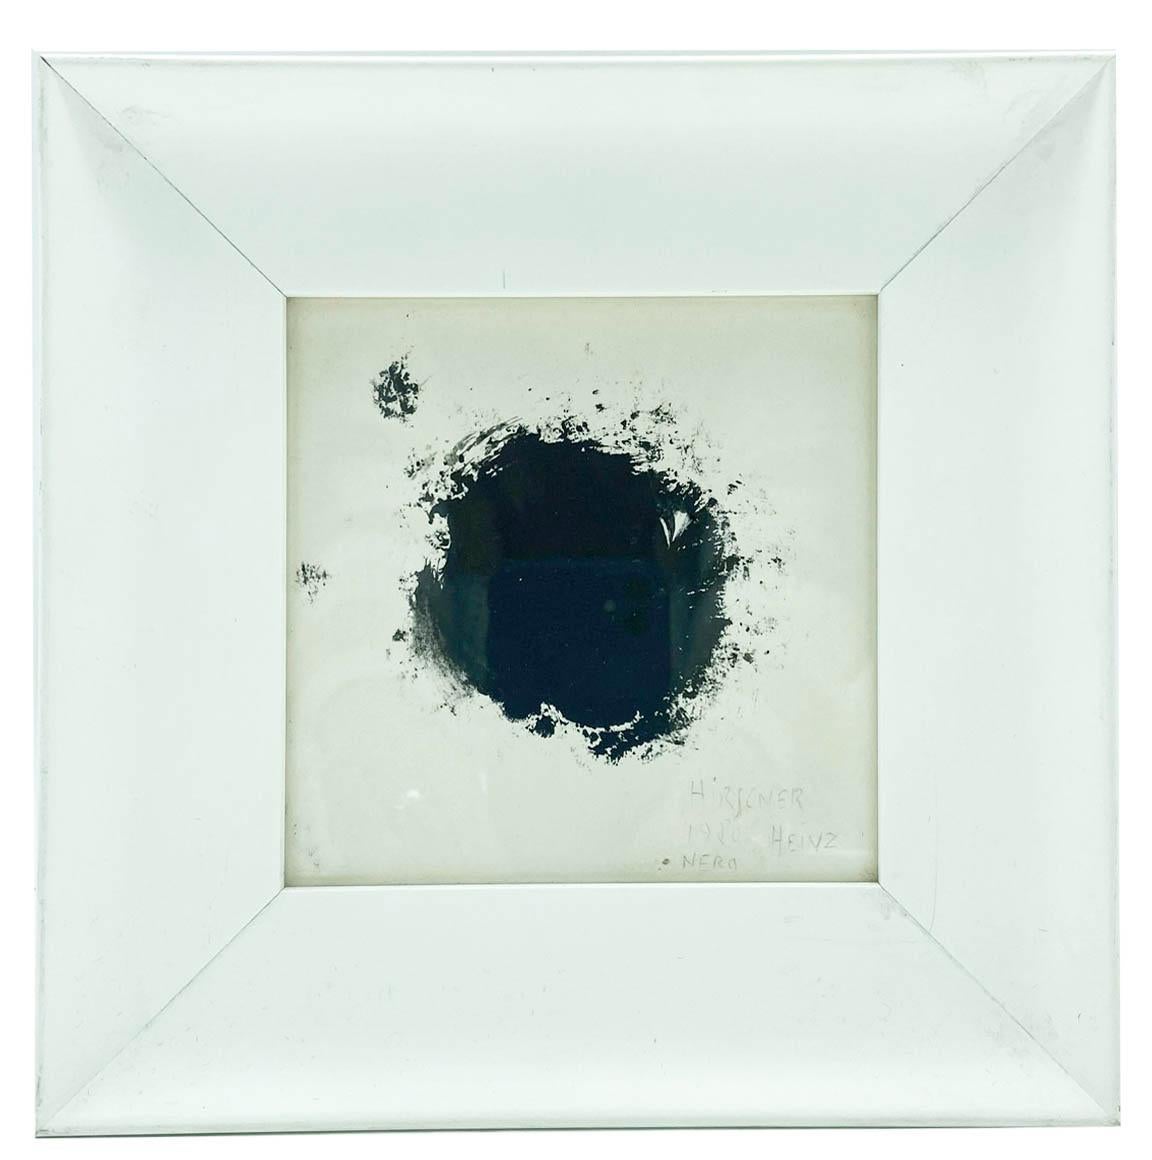 Heinz Hirscner Abstract Painting - Black Point -  Modern - Tempera on paper cm.14x14, 1970